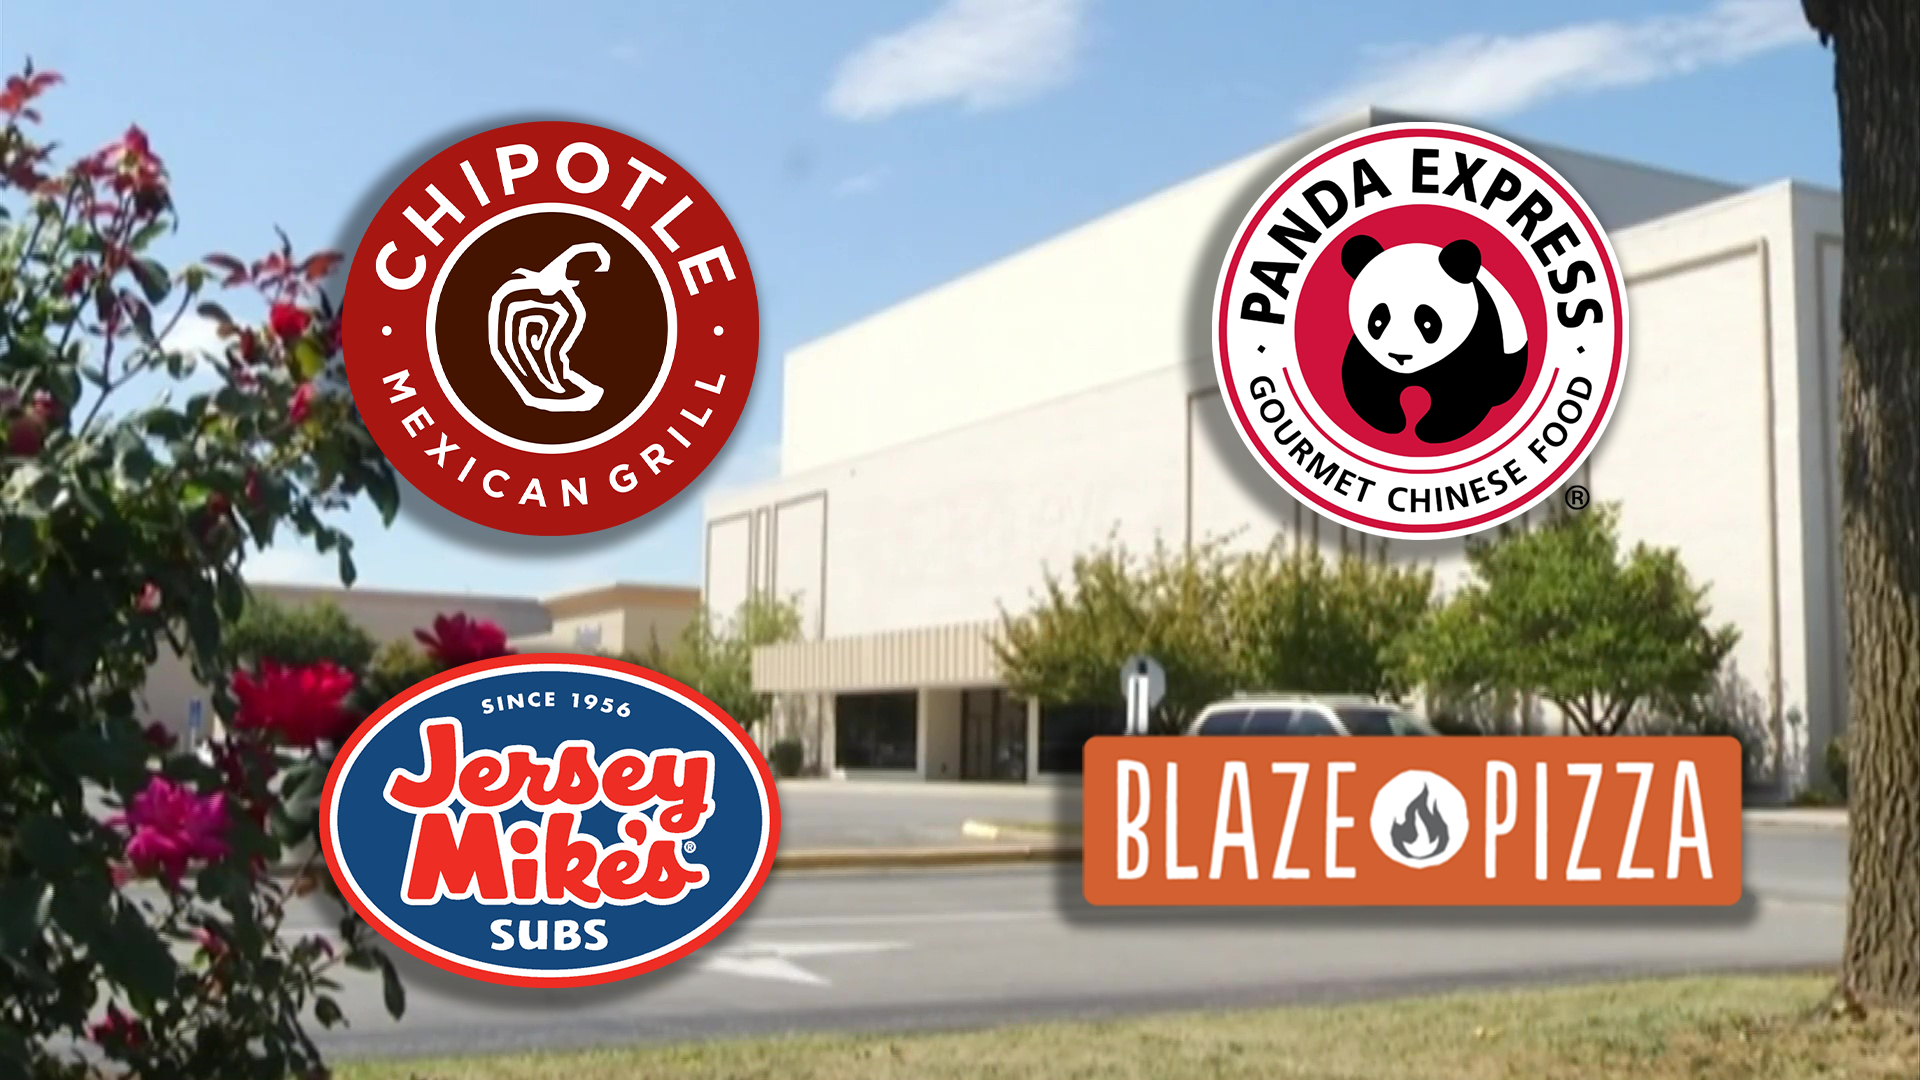 Chipotle Blaze Pizza And More Coming To Tanglewood Mall In 2022